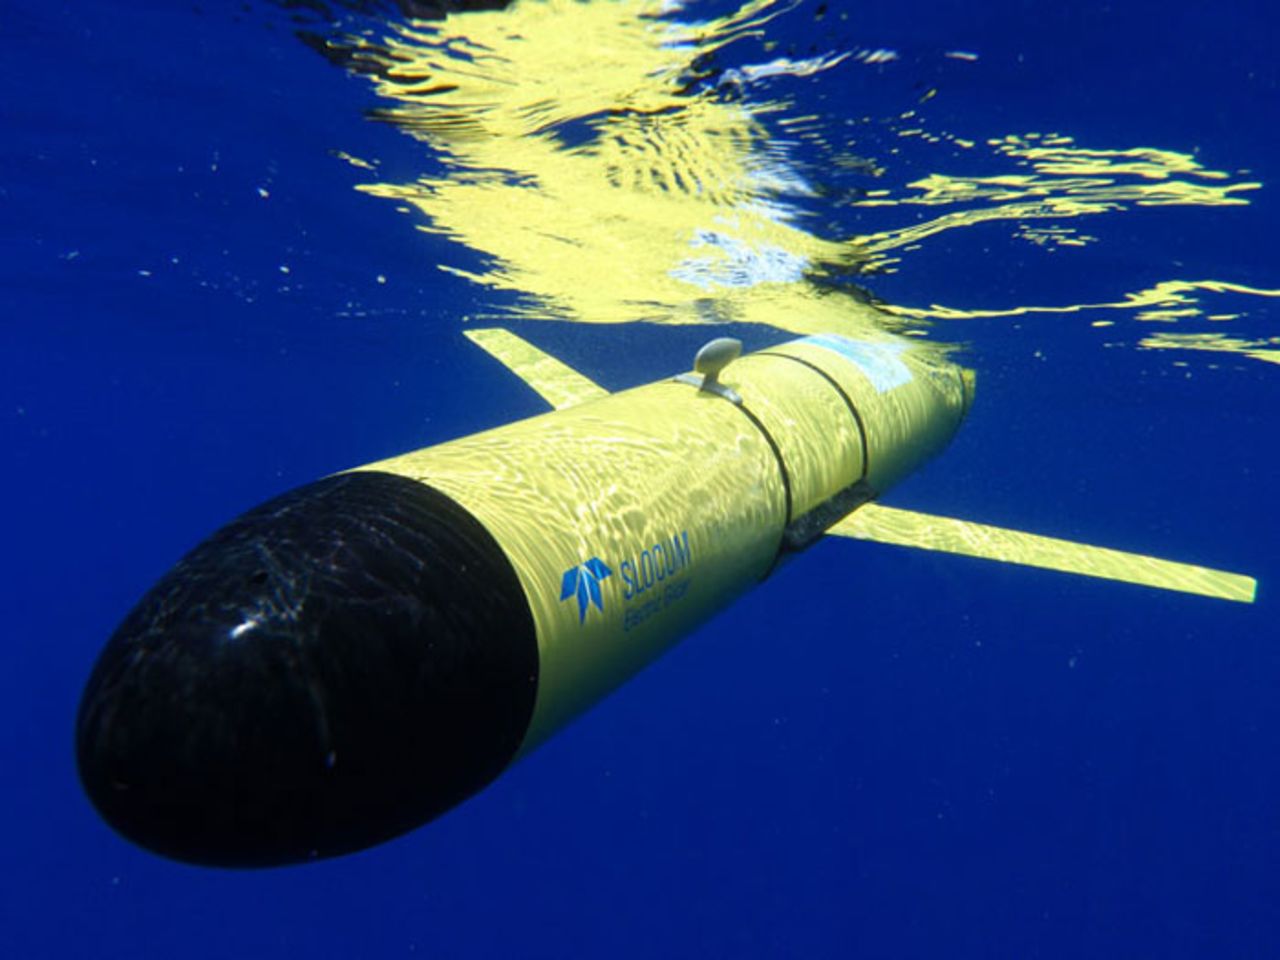 The <a href="http://www.webbresearch.com/slocumglider.aspx" target="_blank" target="_blank">Slocum Glider</a> from WHOI, one of the longest-serving undersea drones. 